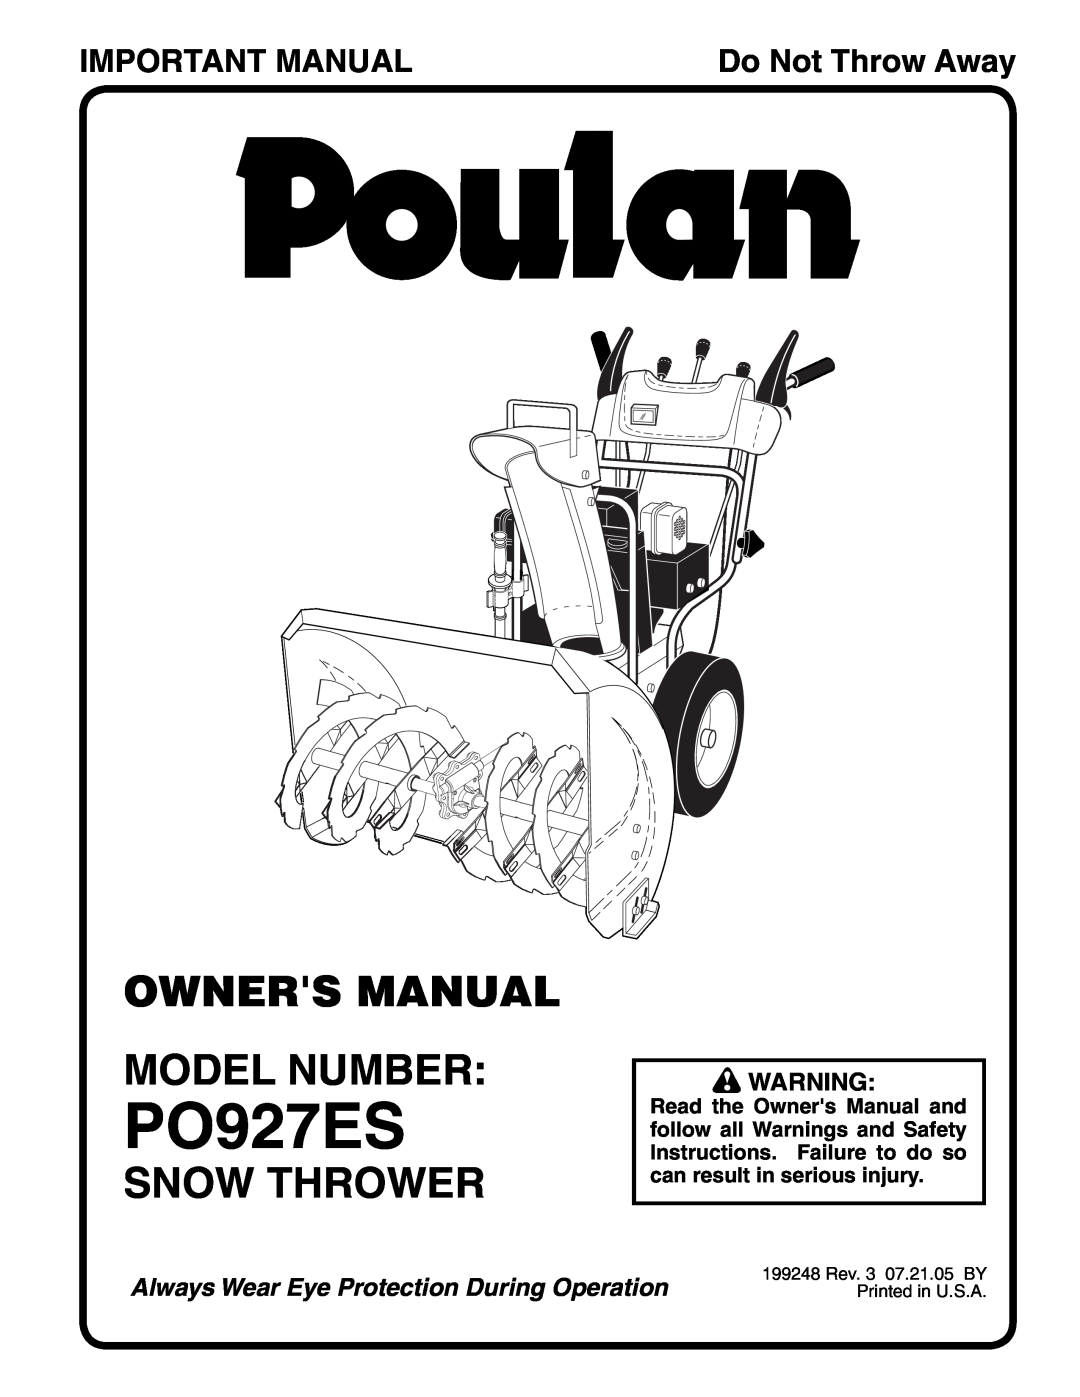 Poulan PO927ES owner manual Owners Manual Model Number, Snow Thrower, Important Manual, Do Not Throw Away 